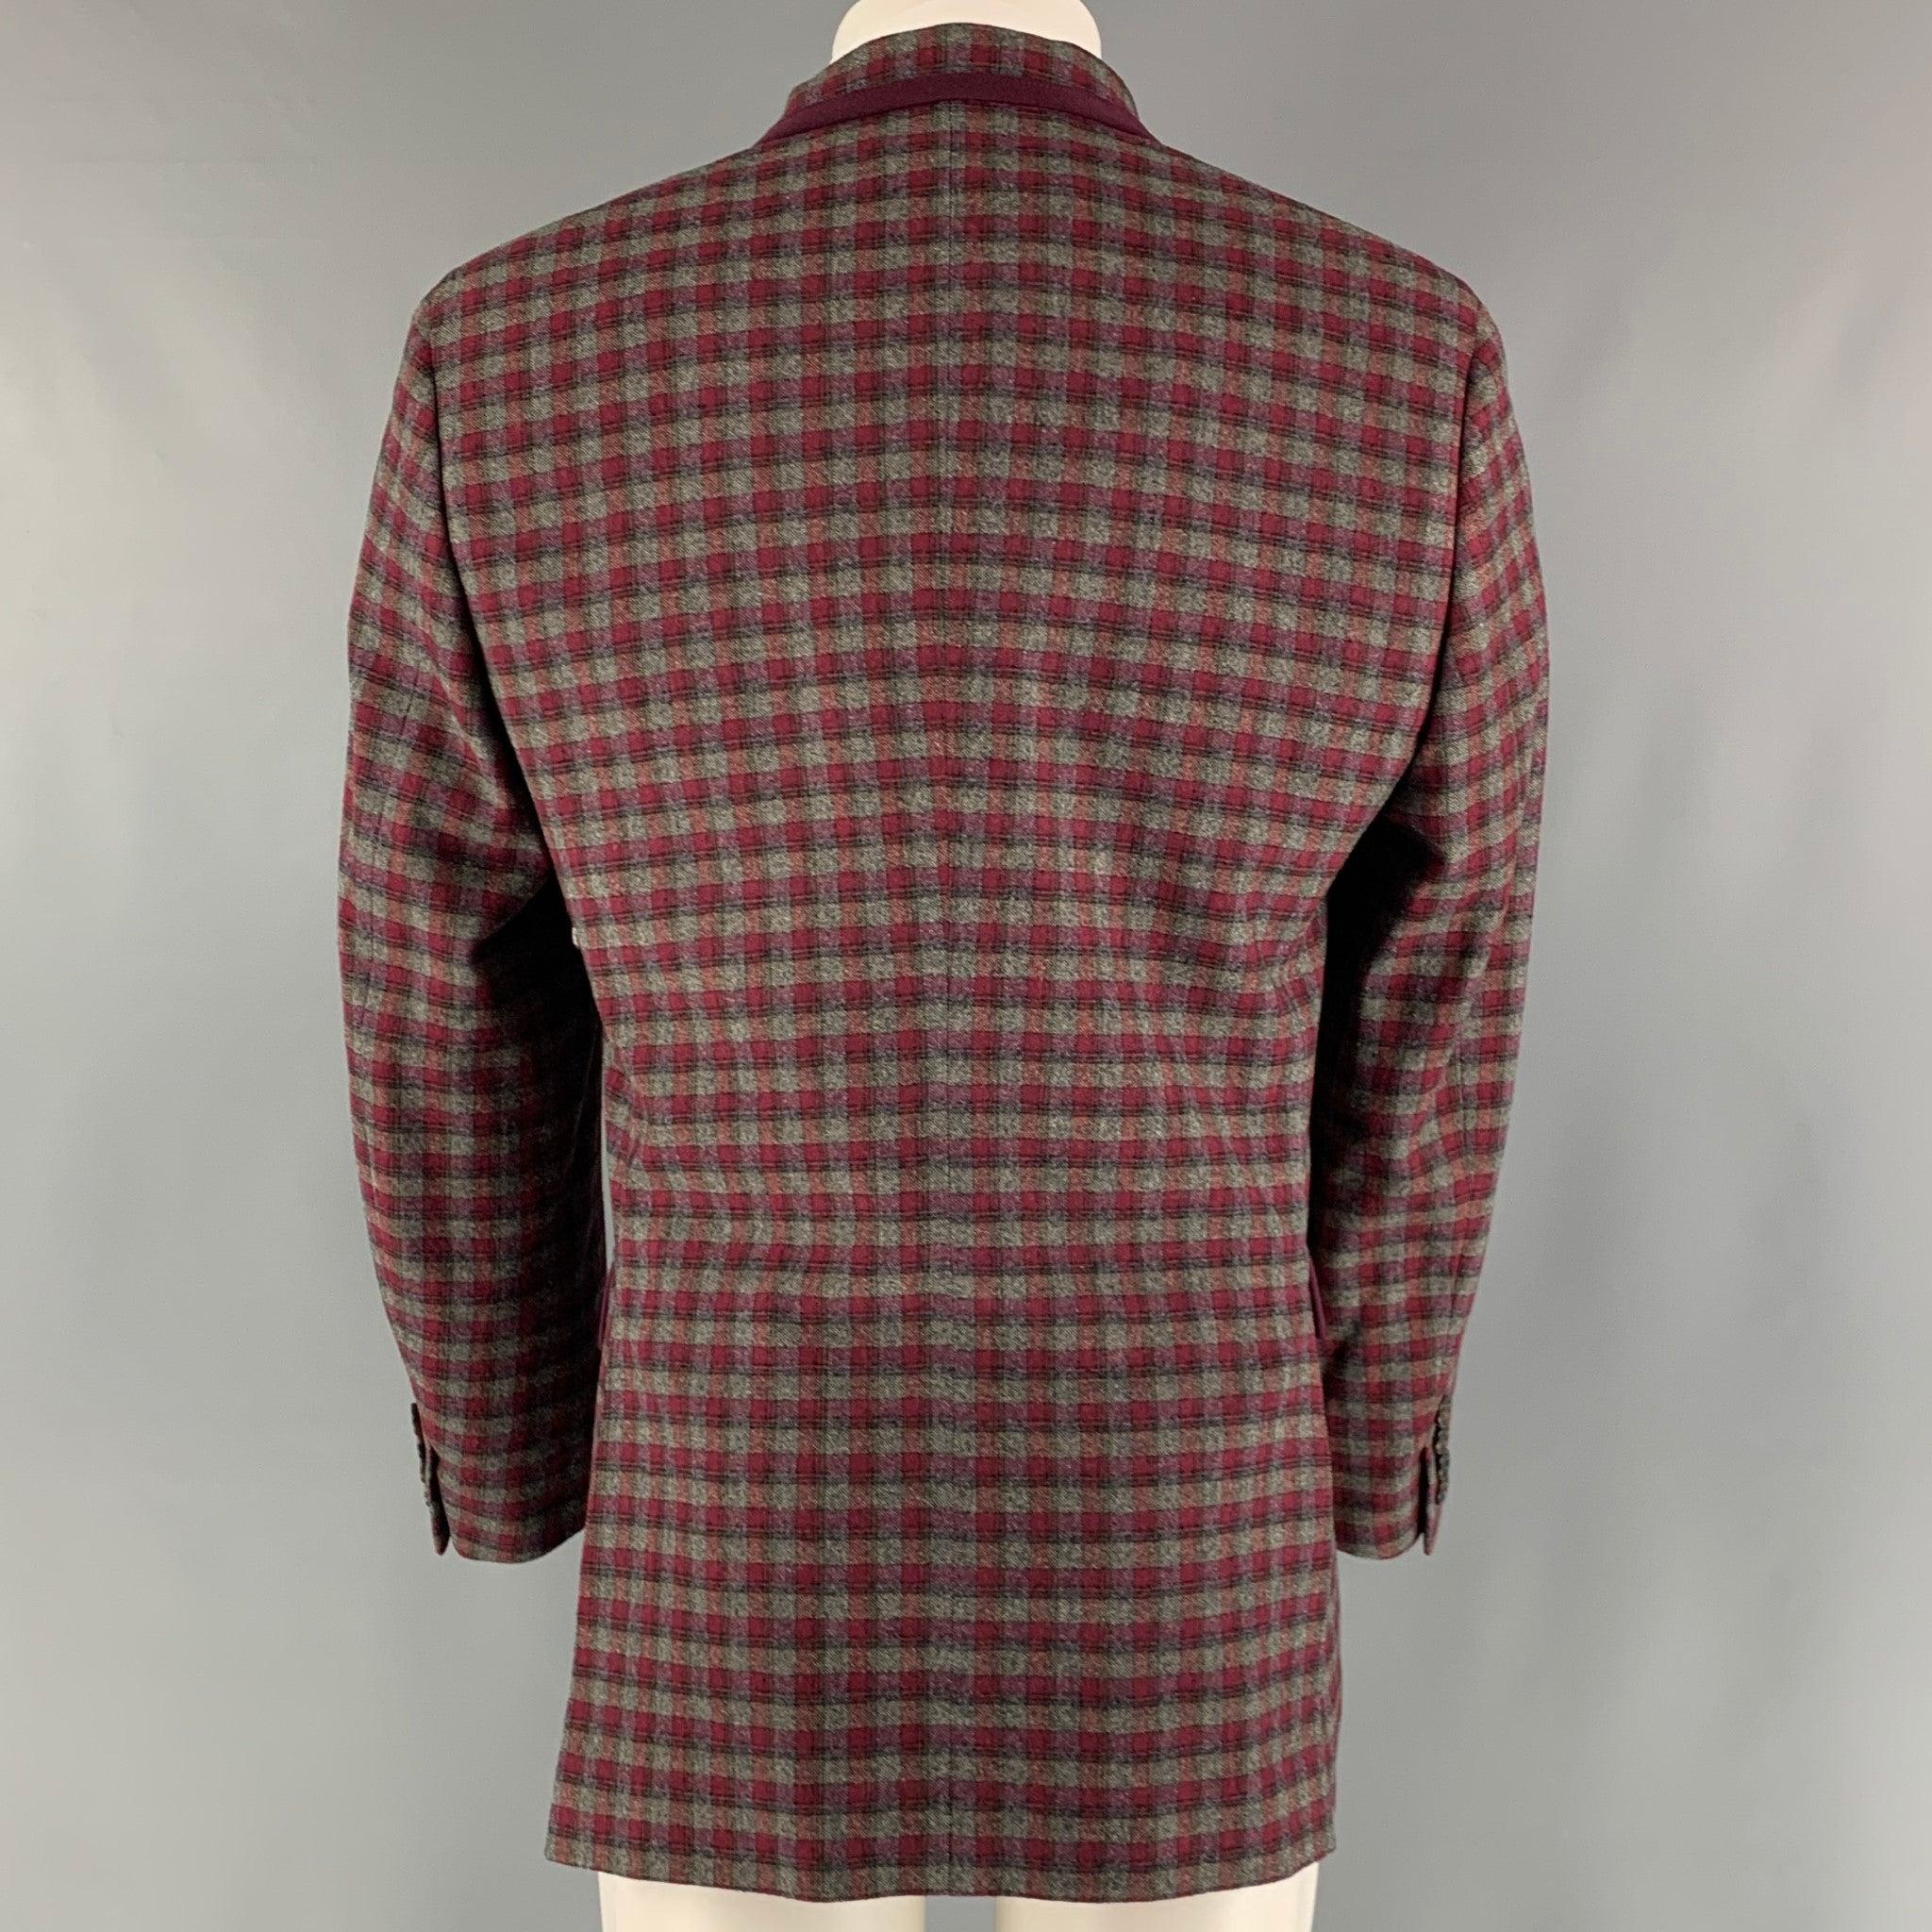 ETRO Size 40 Grey Burgundy Checkered Cotton Blend Notch Lapel Sport Coat In Good Condition For Sale In San Francisco, CA